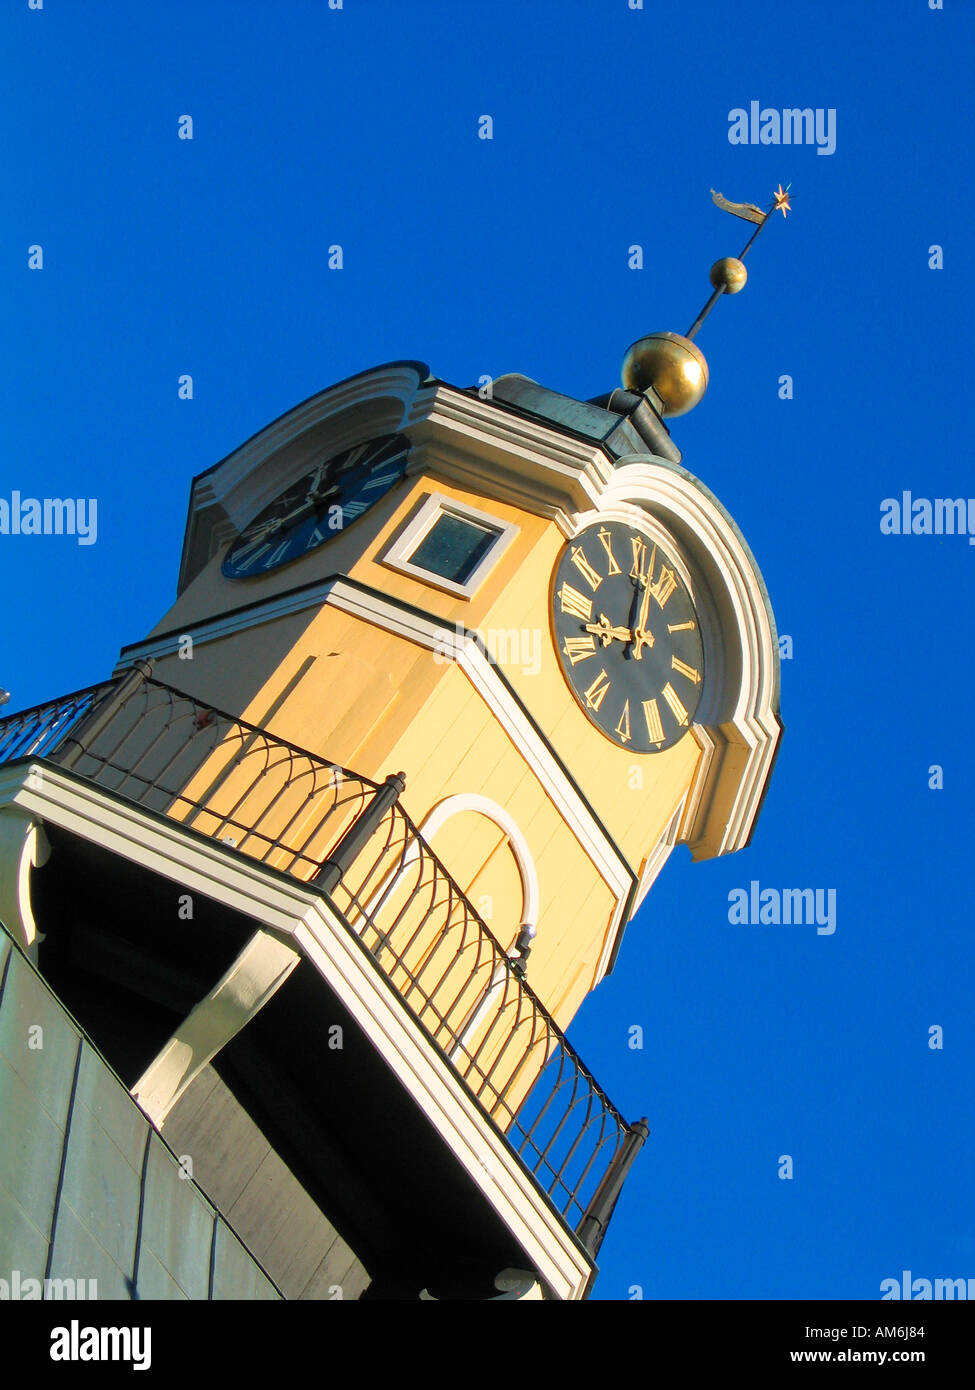 The clock tower of the wooden town hall house at Rådhustorget square in idyllic Söderköping Sweden Stock Photo